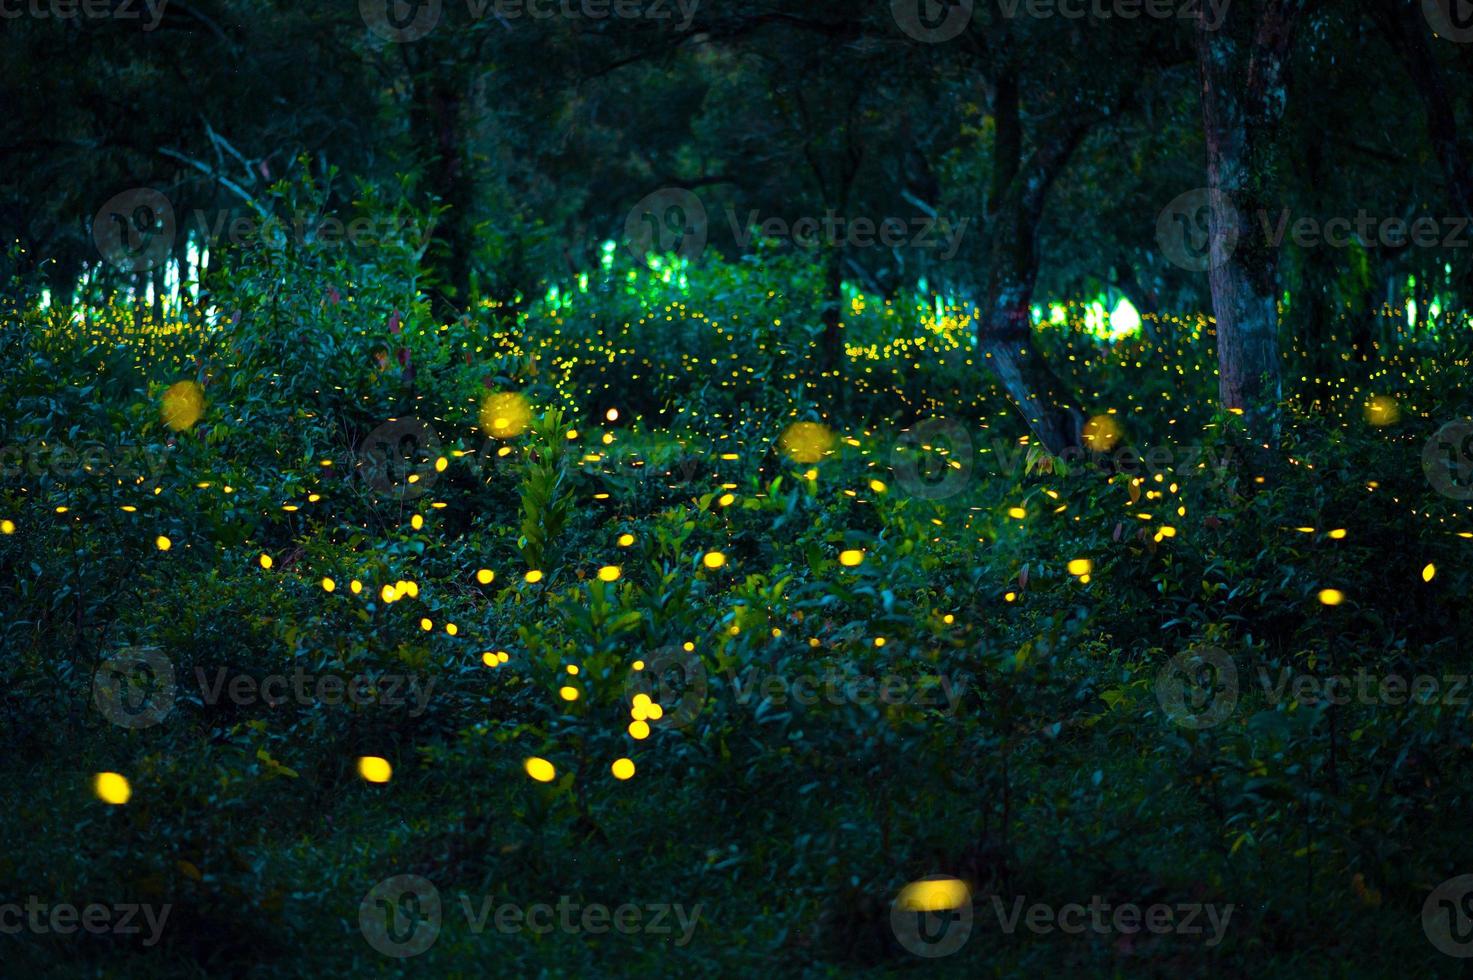 Firefly flying in the forest. Fireflies in the bush at night at Prachinburi, Thailand. Bokeh light of firefly flying in forest night time. Long exposure photos at night have noise, selective focus.